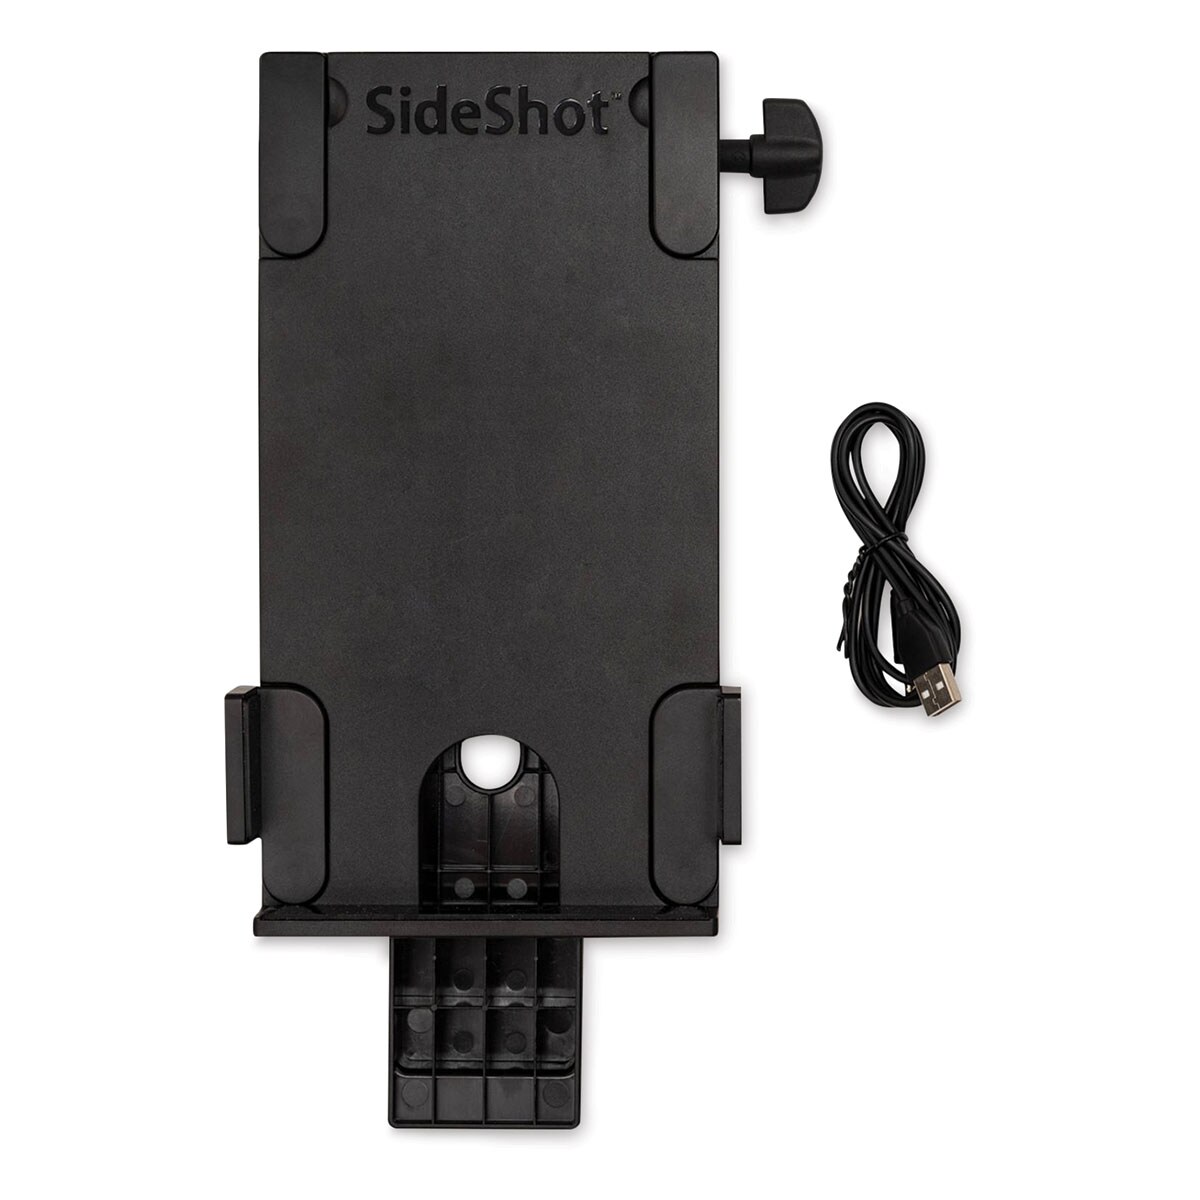 We R Memory Keepers ShotBox SideShot Arm Attachment